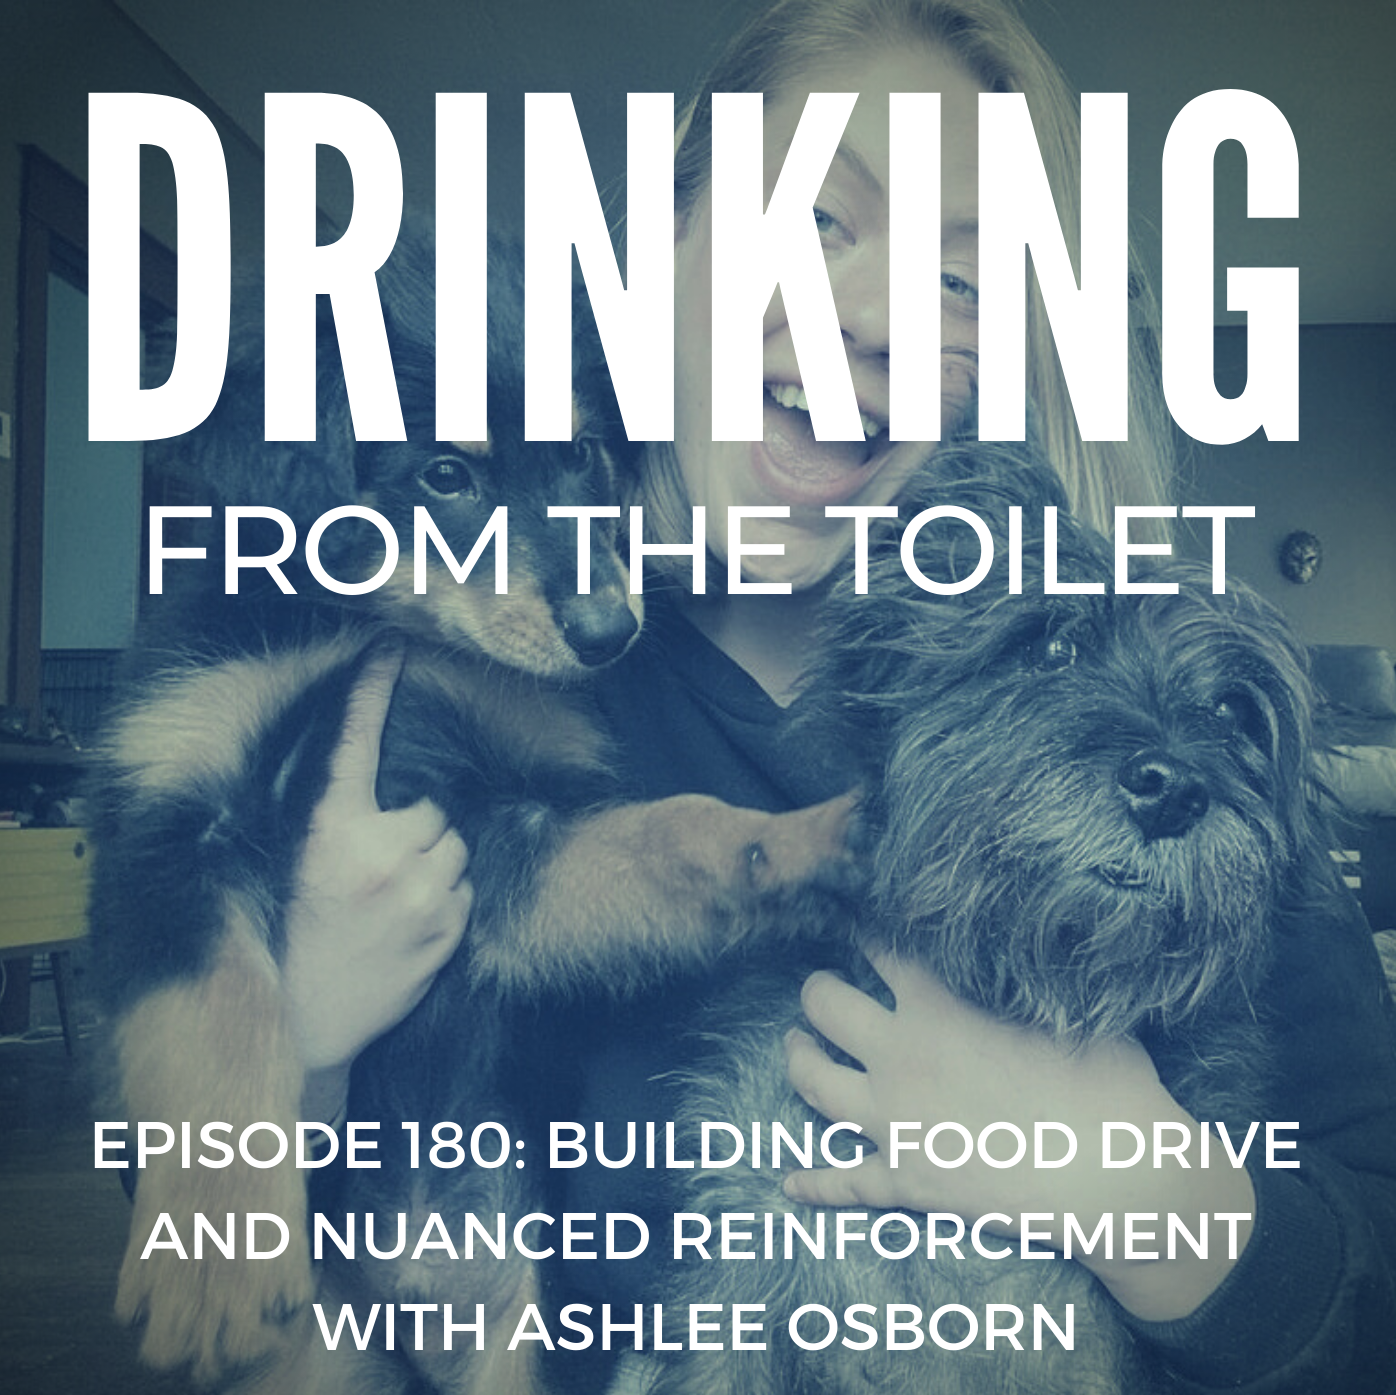 Podcast #180: Building Food Drive and Nuanced Reinforcement with Ashlee Osborn